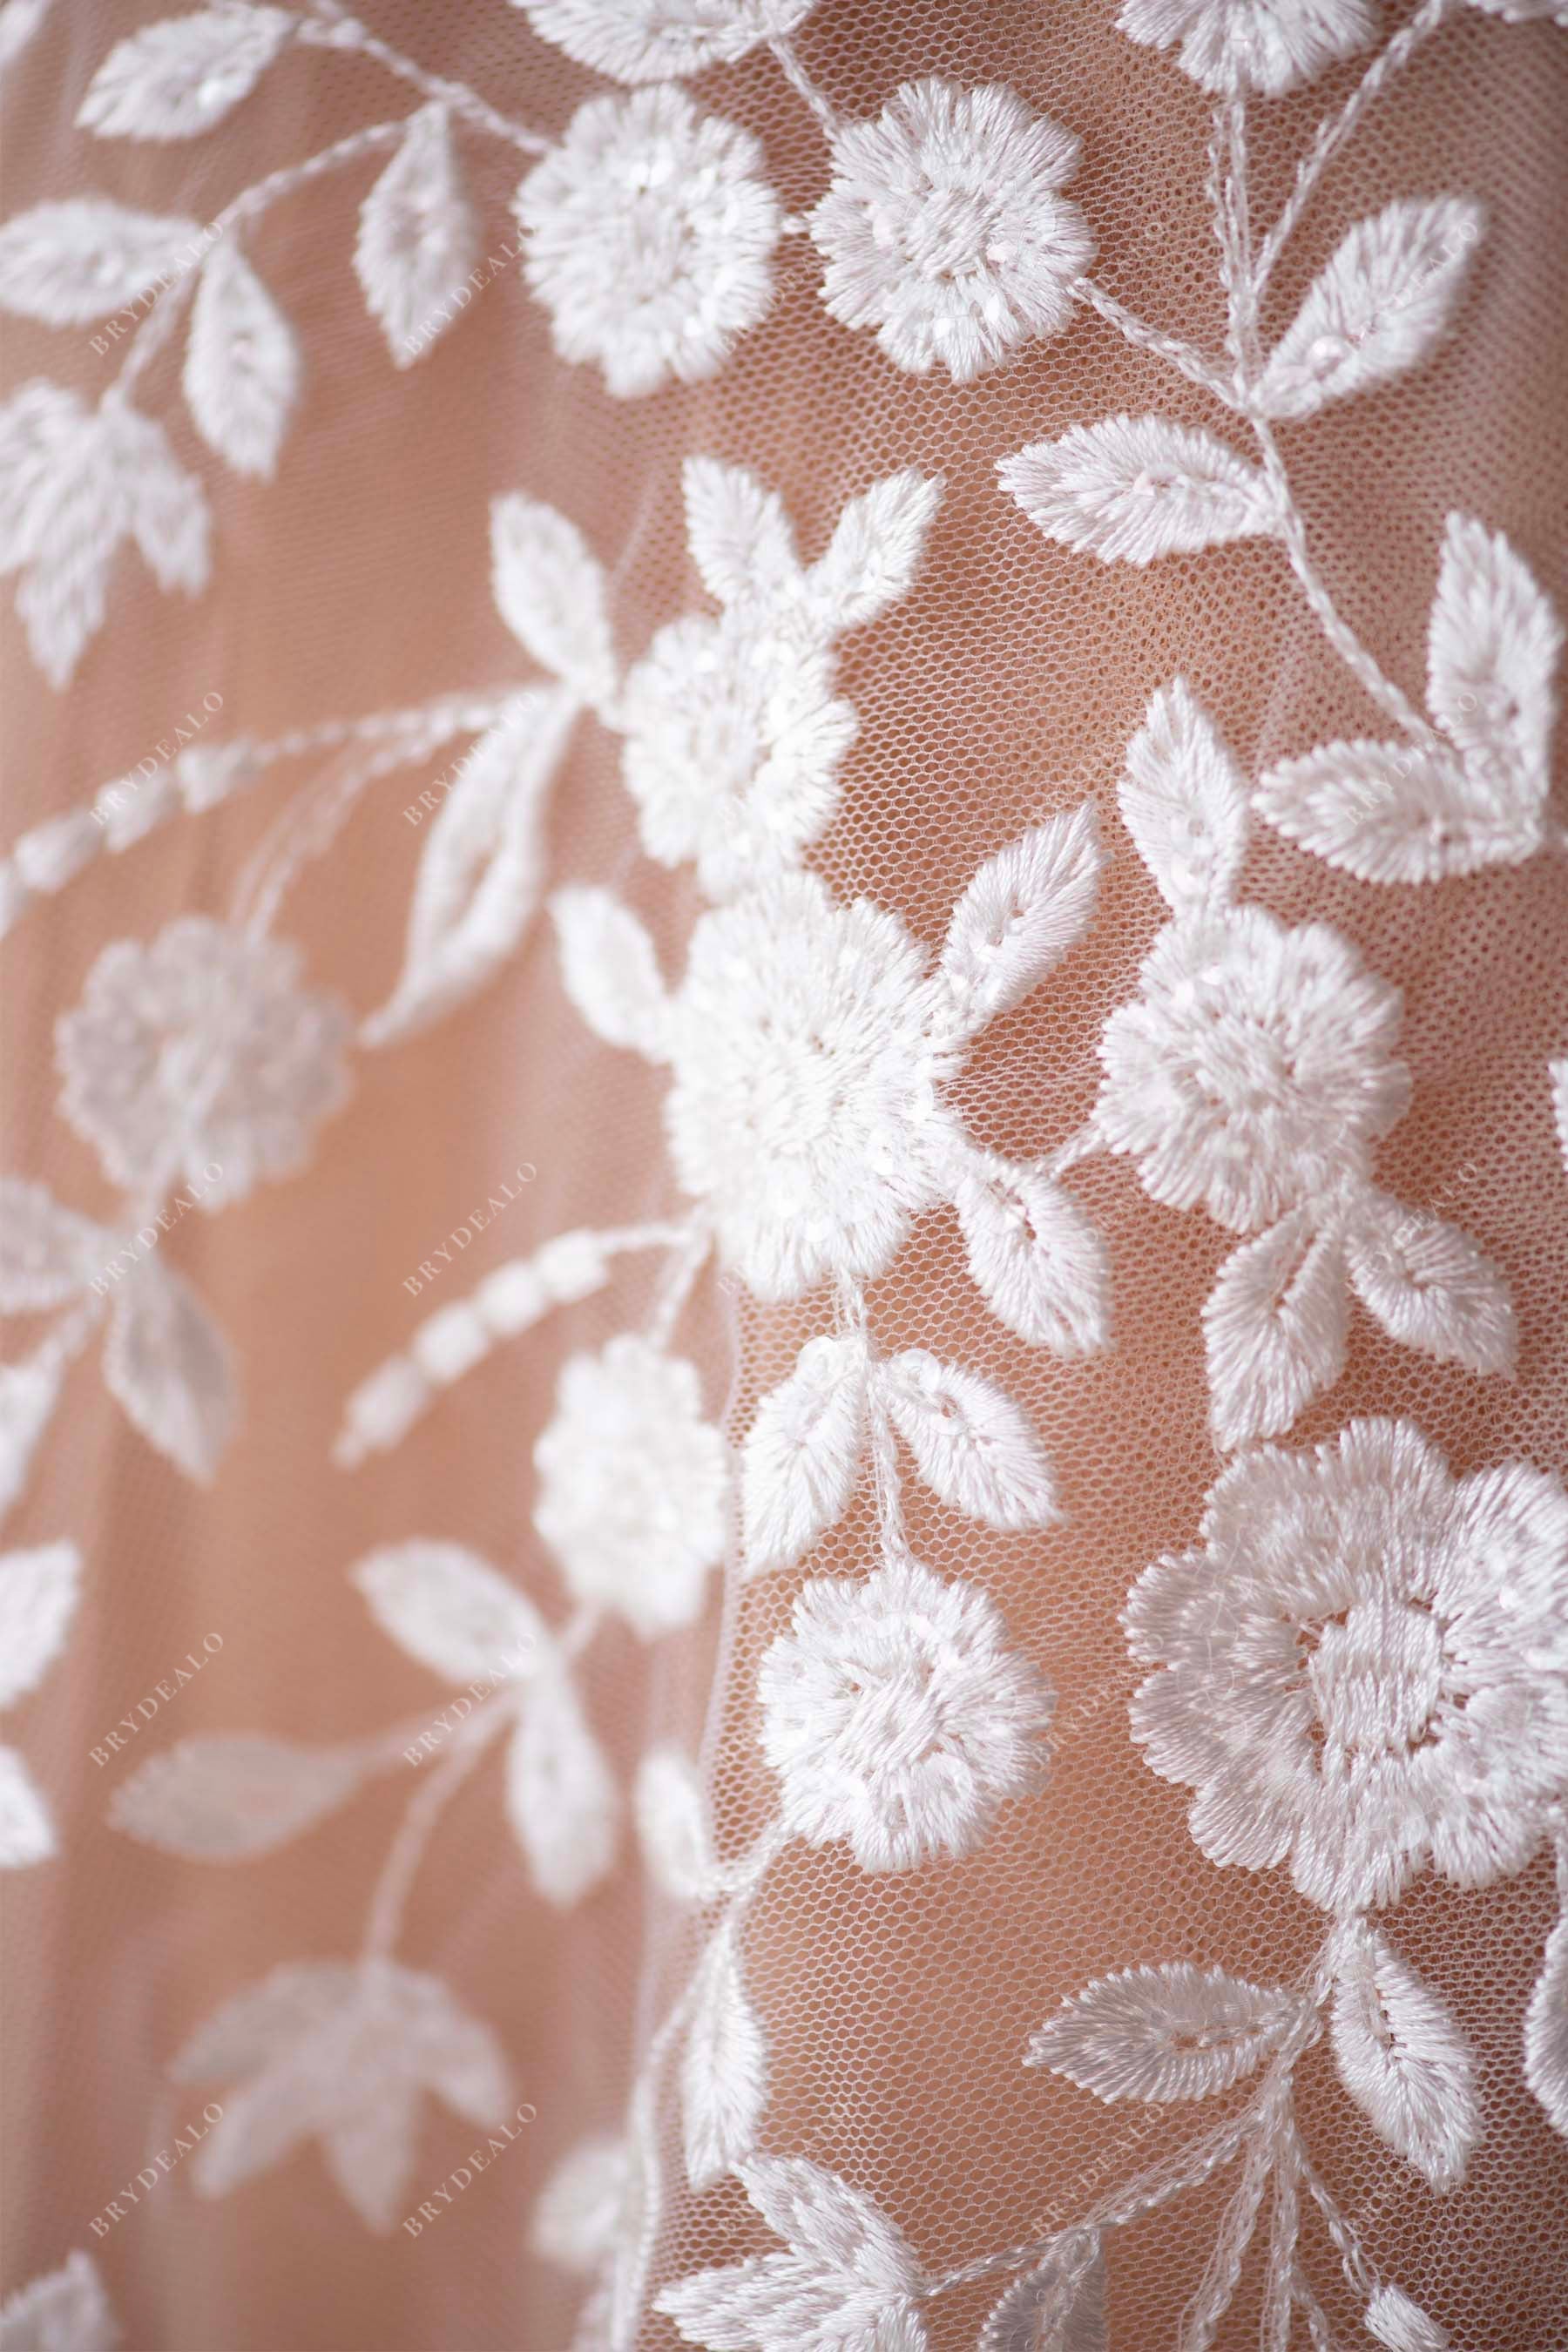 embroidery flower lace fabric online